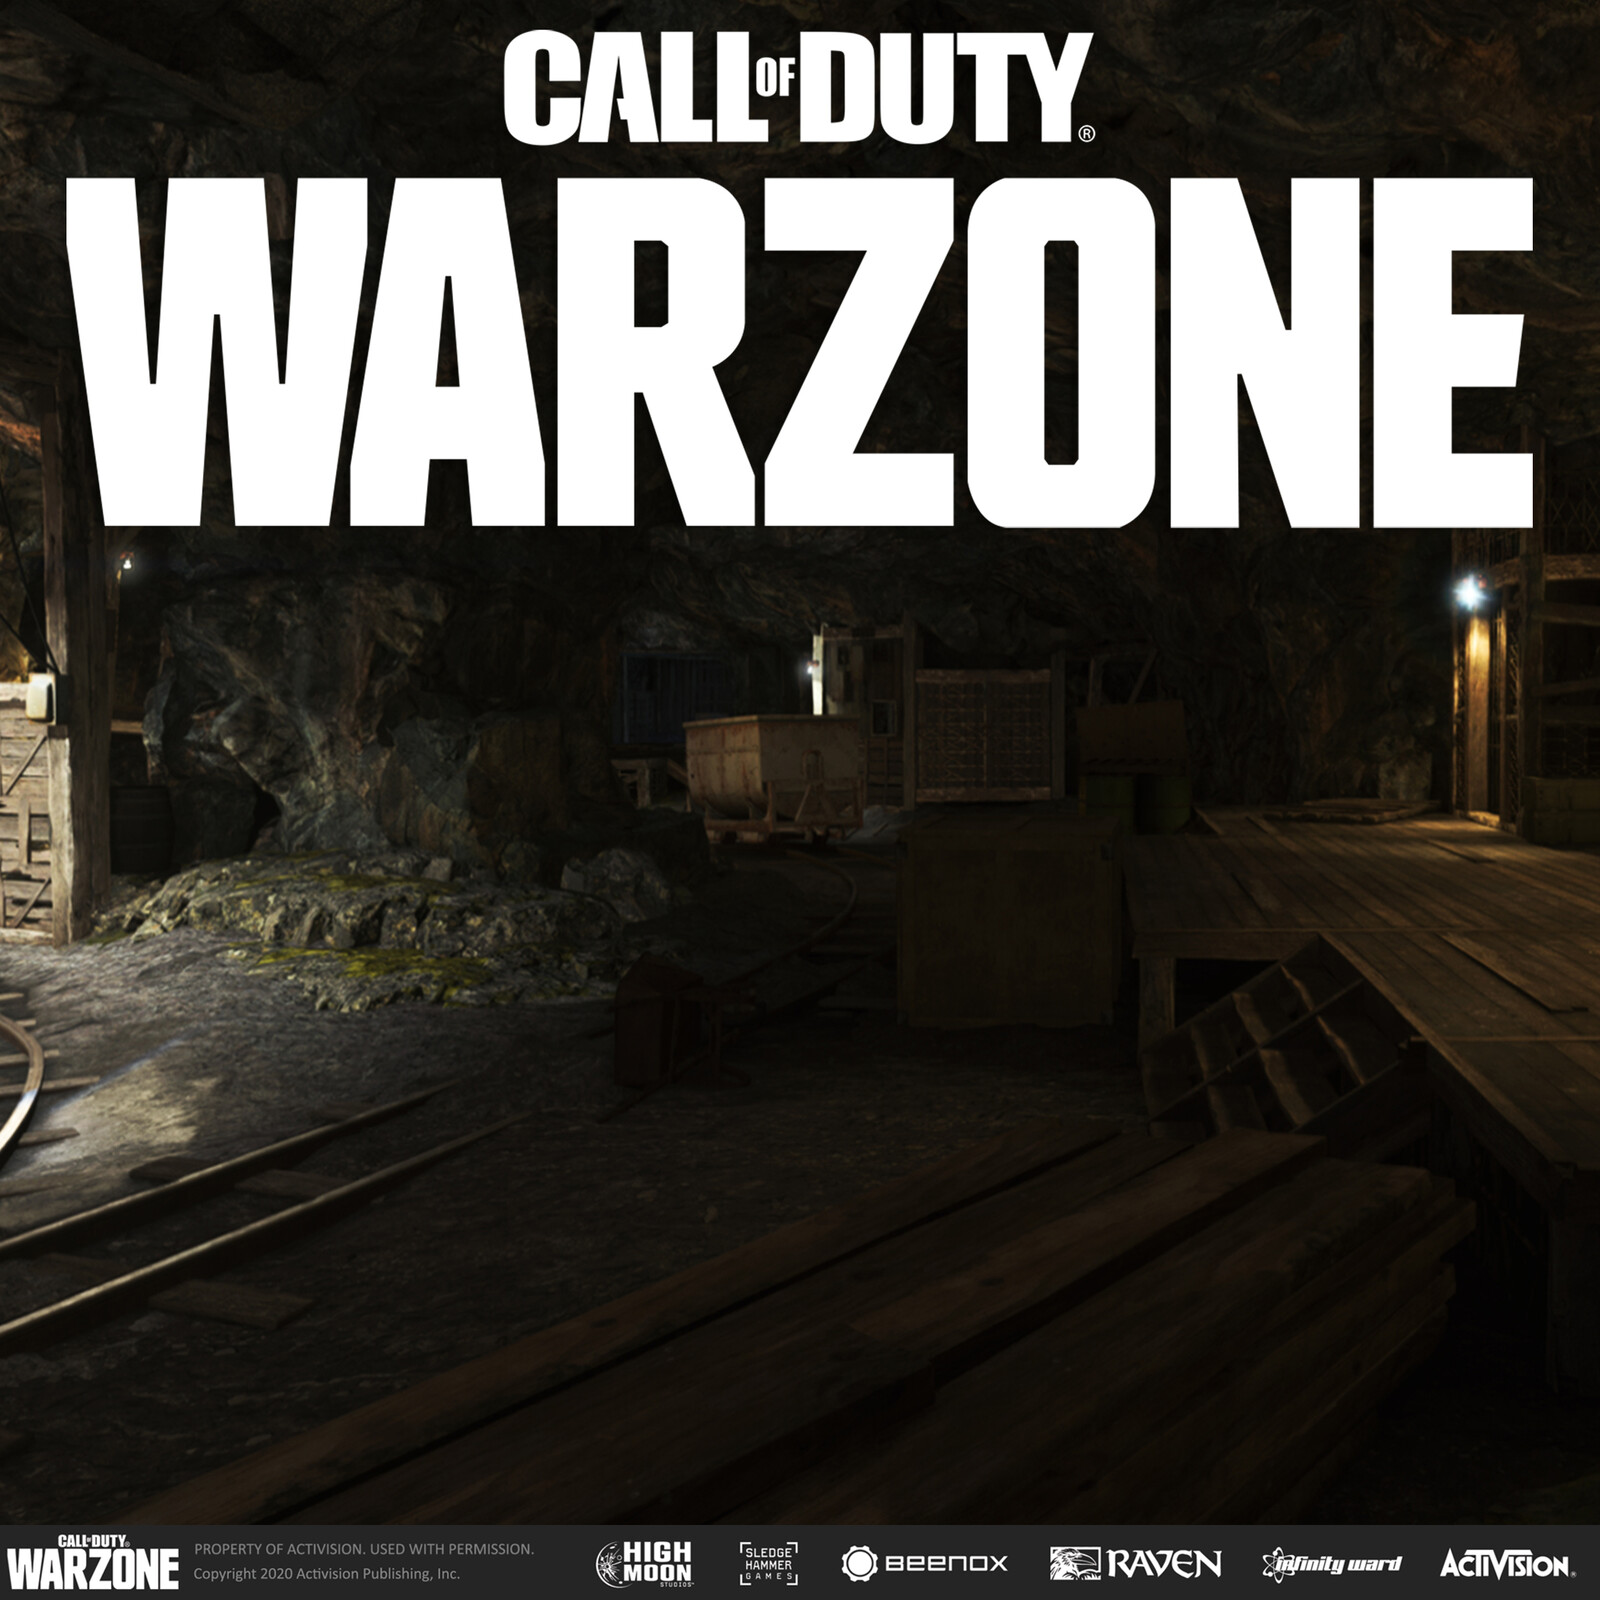 Call Of Duty: Vanguard Warzone - Mines, Tunnels - 2